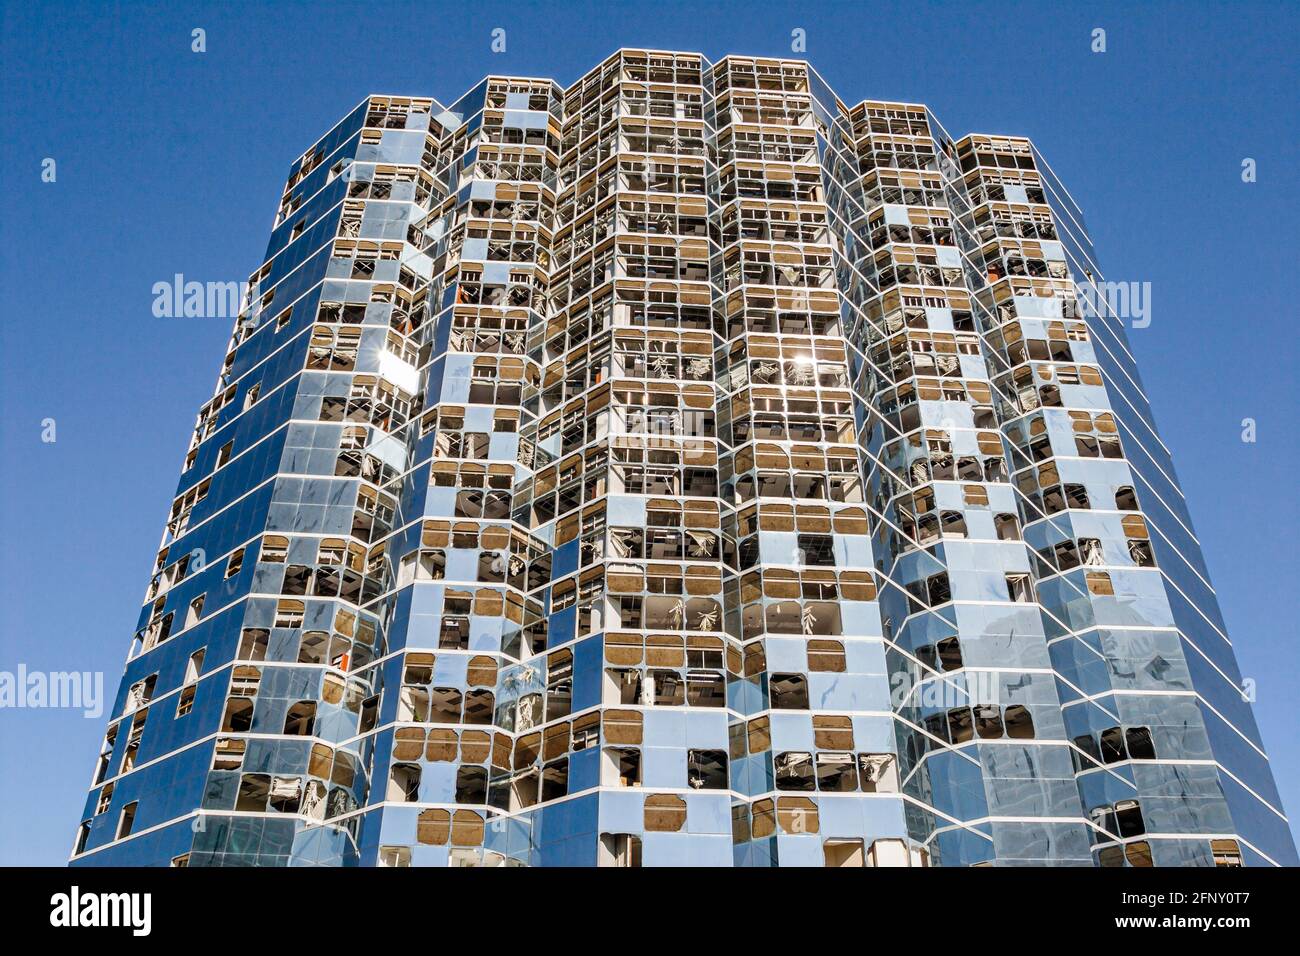 Miami Florida,Brickell Avenue high rise office building,tower windows broken damage after Hurricane Wilma, Stock Photo